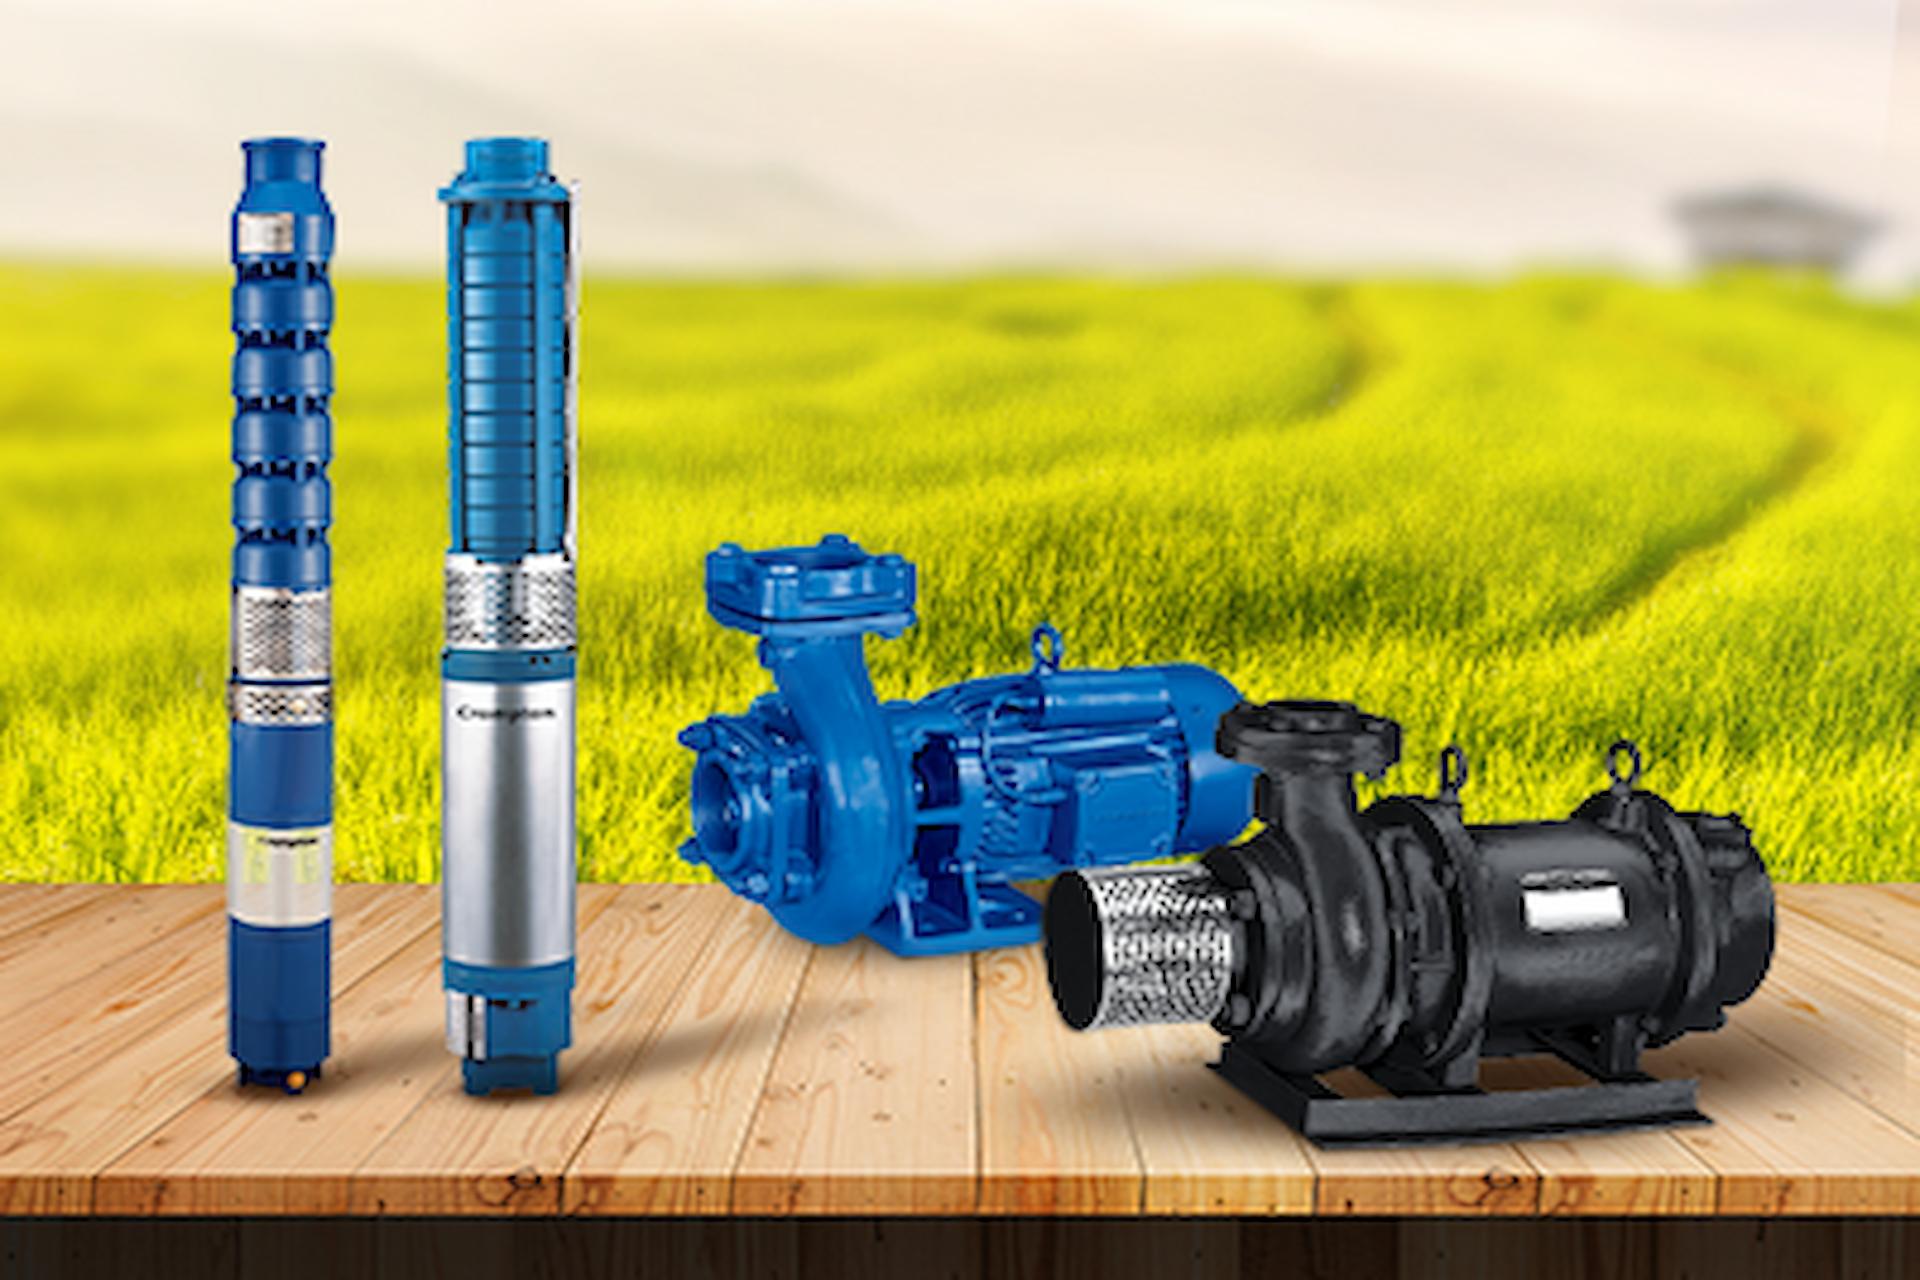 Choosing The Right Pump According To Your Needs